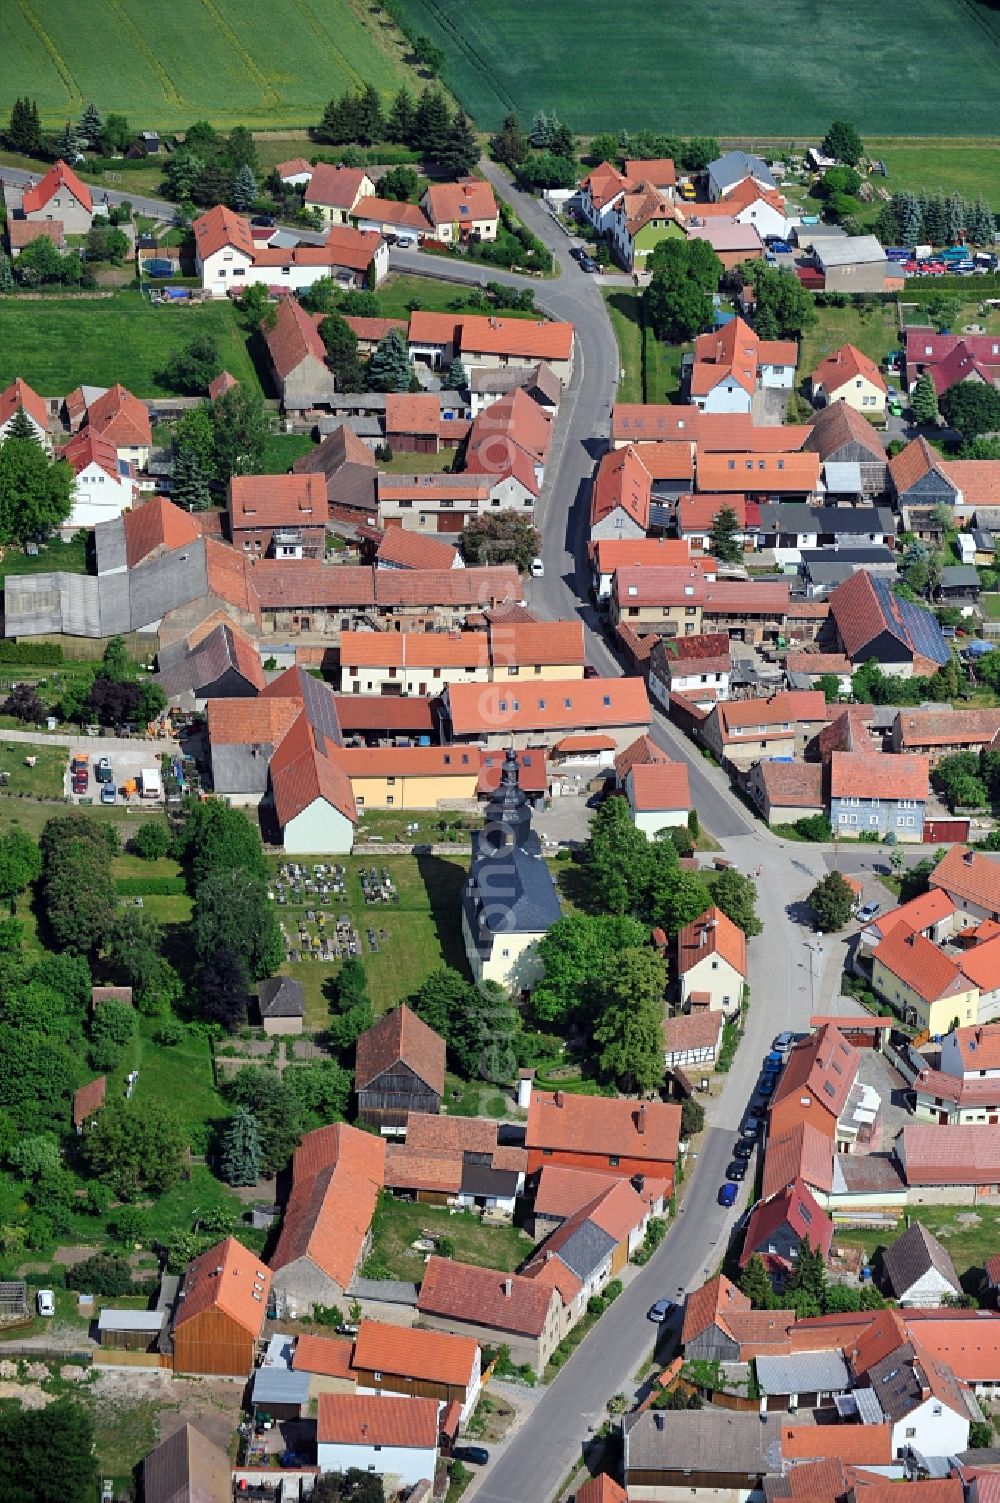 Hohenfelden from the bird's eye view: Town view of Hohenfelden in the state of Thuringia